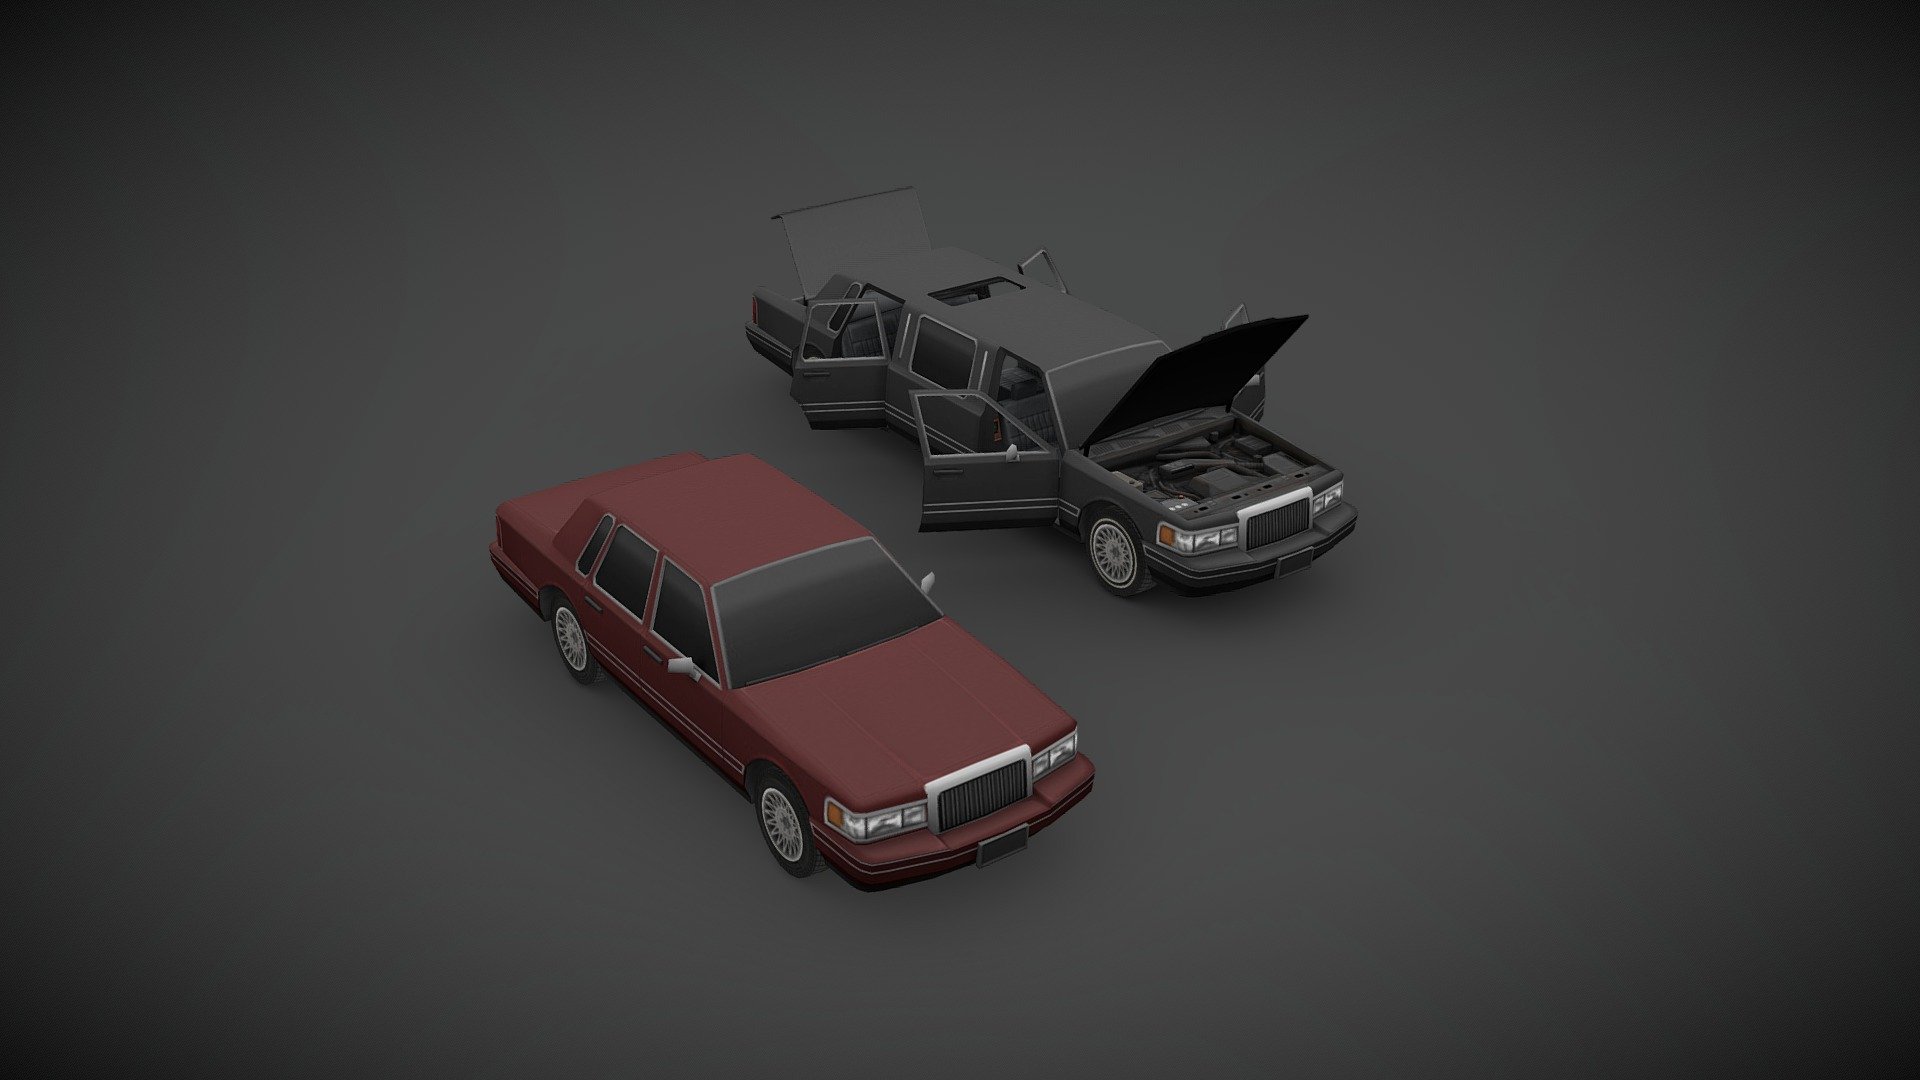 Showcase of a 1993 Lincoln Town Car I’ve made for project ZOMBOID, low poly but with a high detail texture, optimized for game engine. This version is not a 100% true to the original since there are some compromises I’ve had to make to present it here.

You can find the actual version in project ZOMBOID STEAM Workshop 3d model